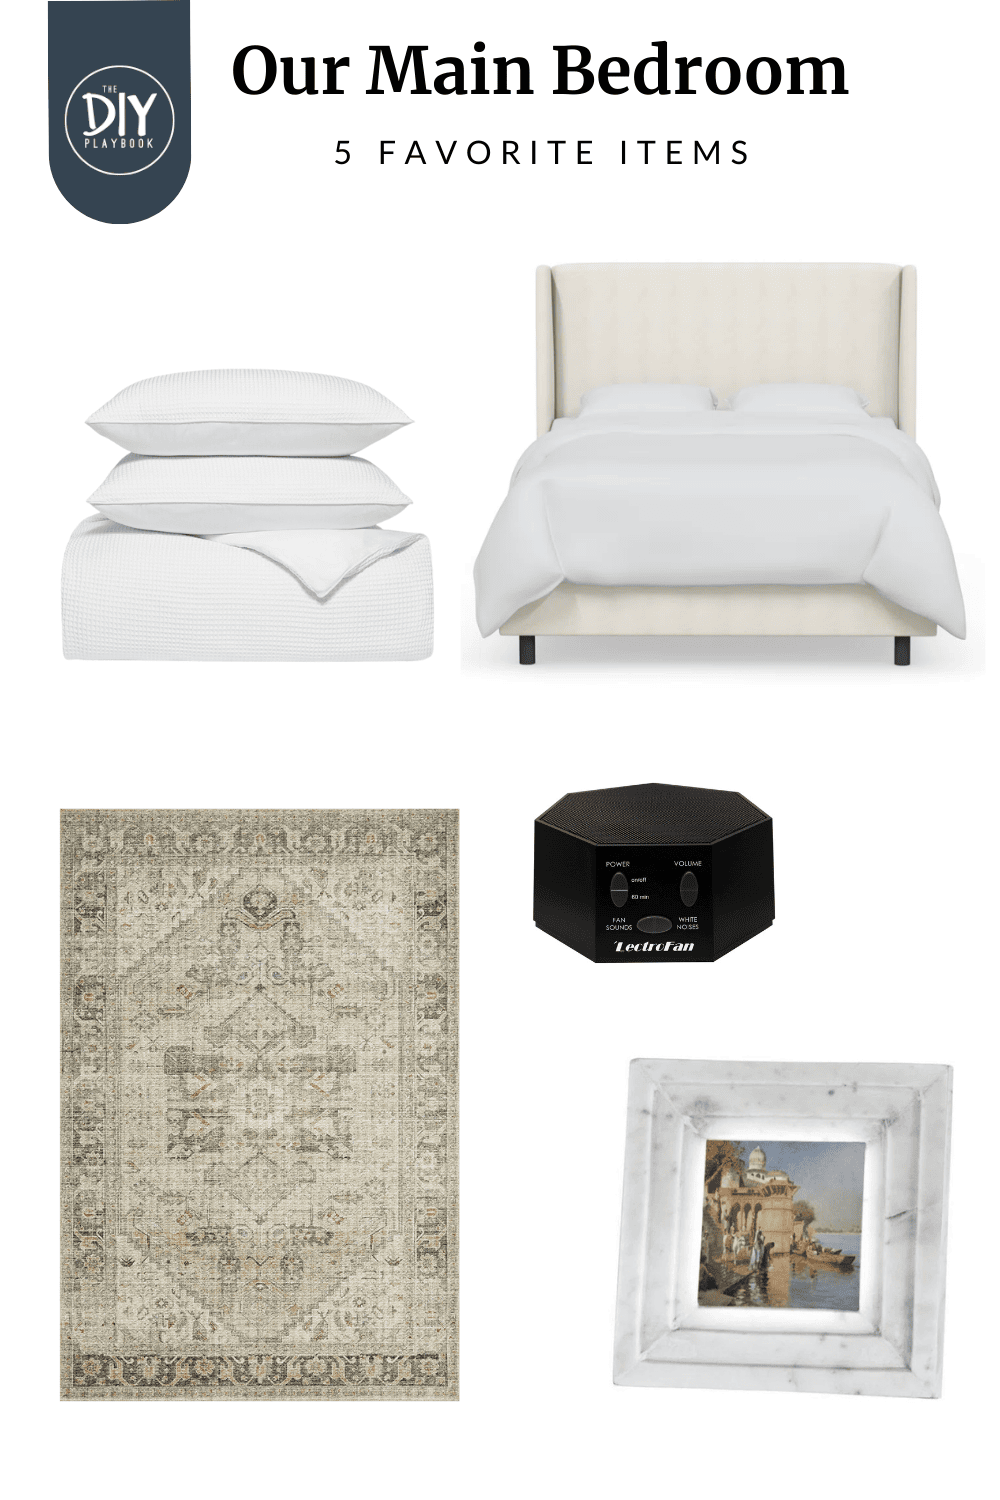 5 favorite items from our main bedroom 